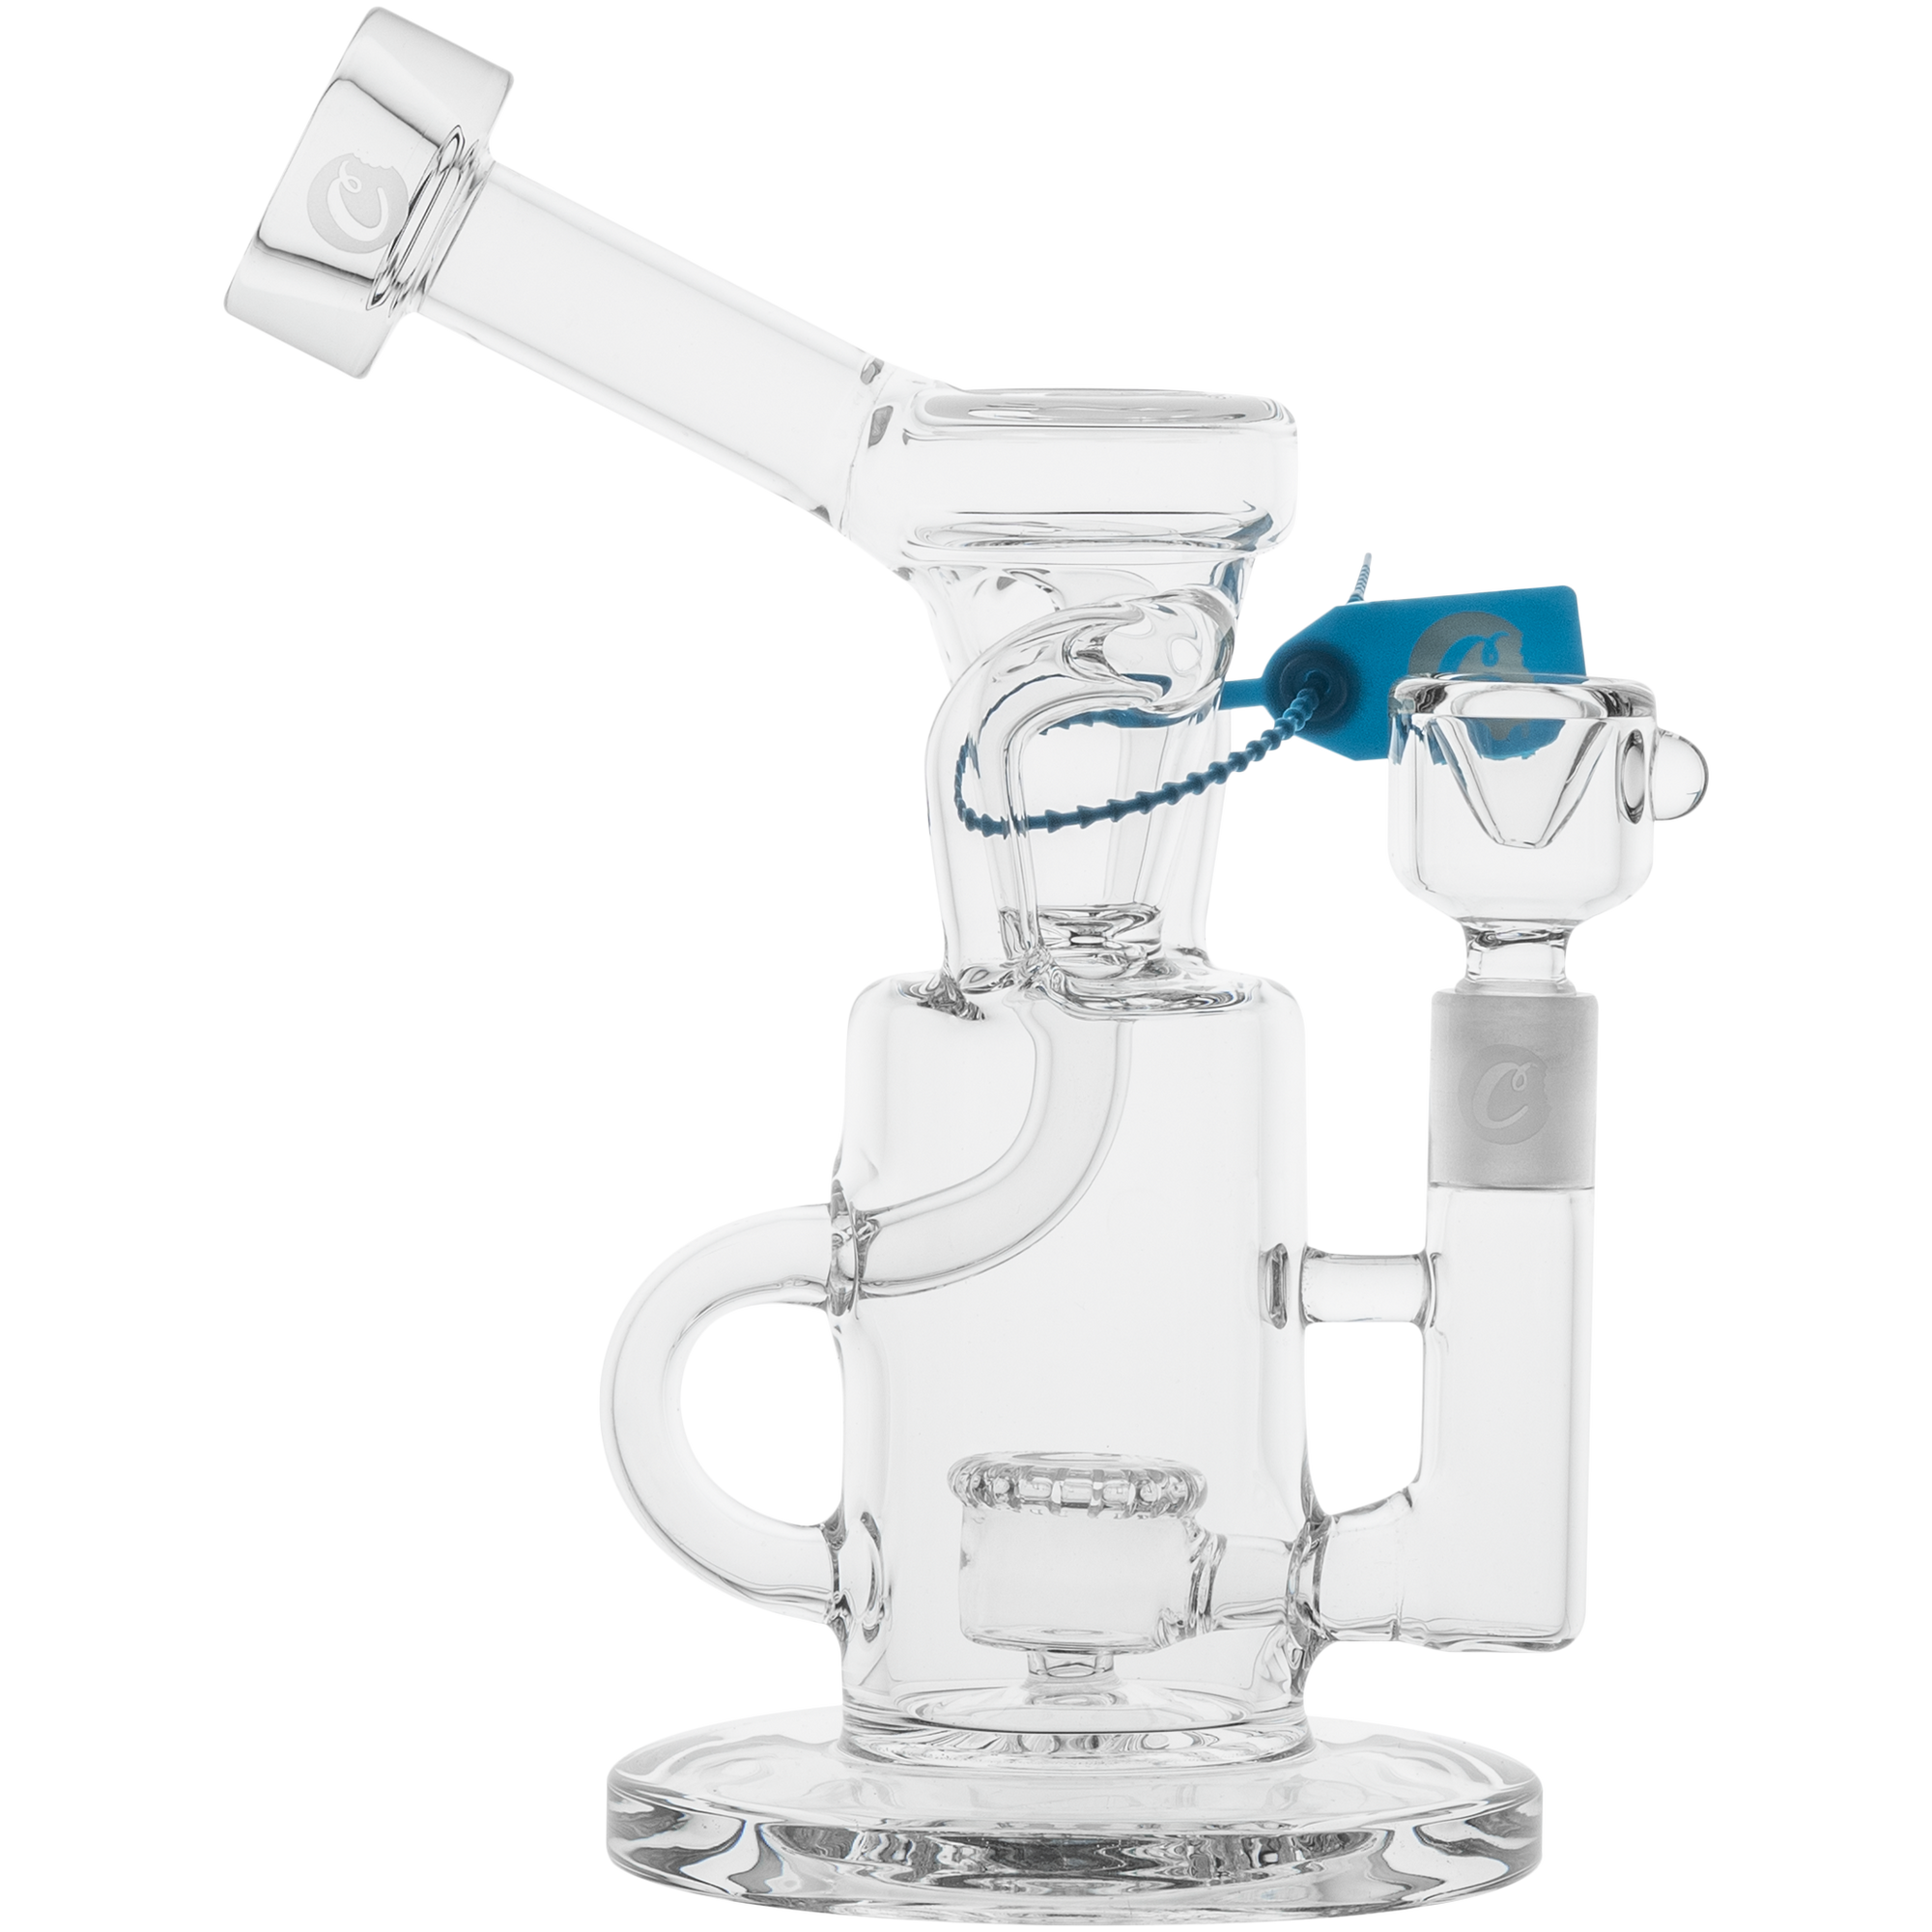 Cookies Doublecycler Dab Rig (ONLINE ONLY)